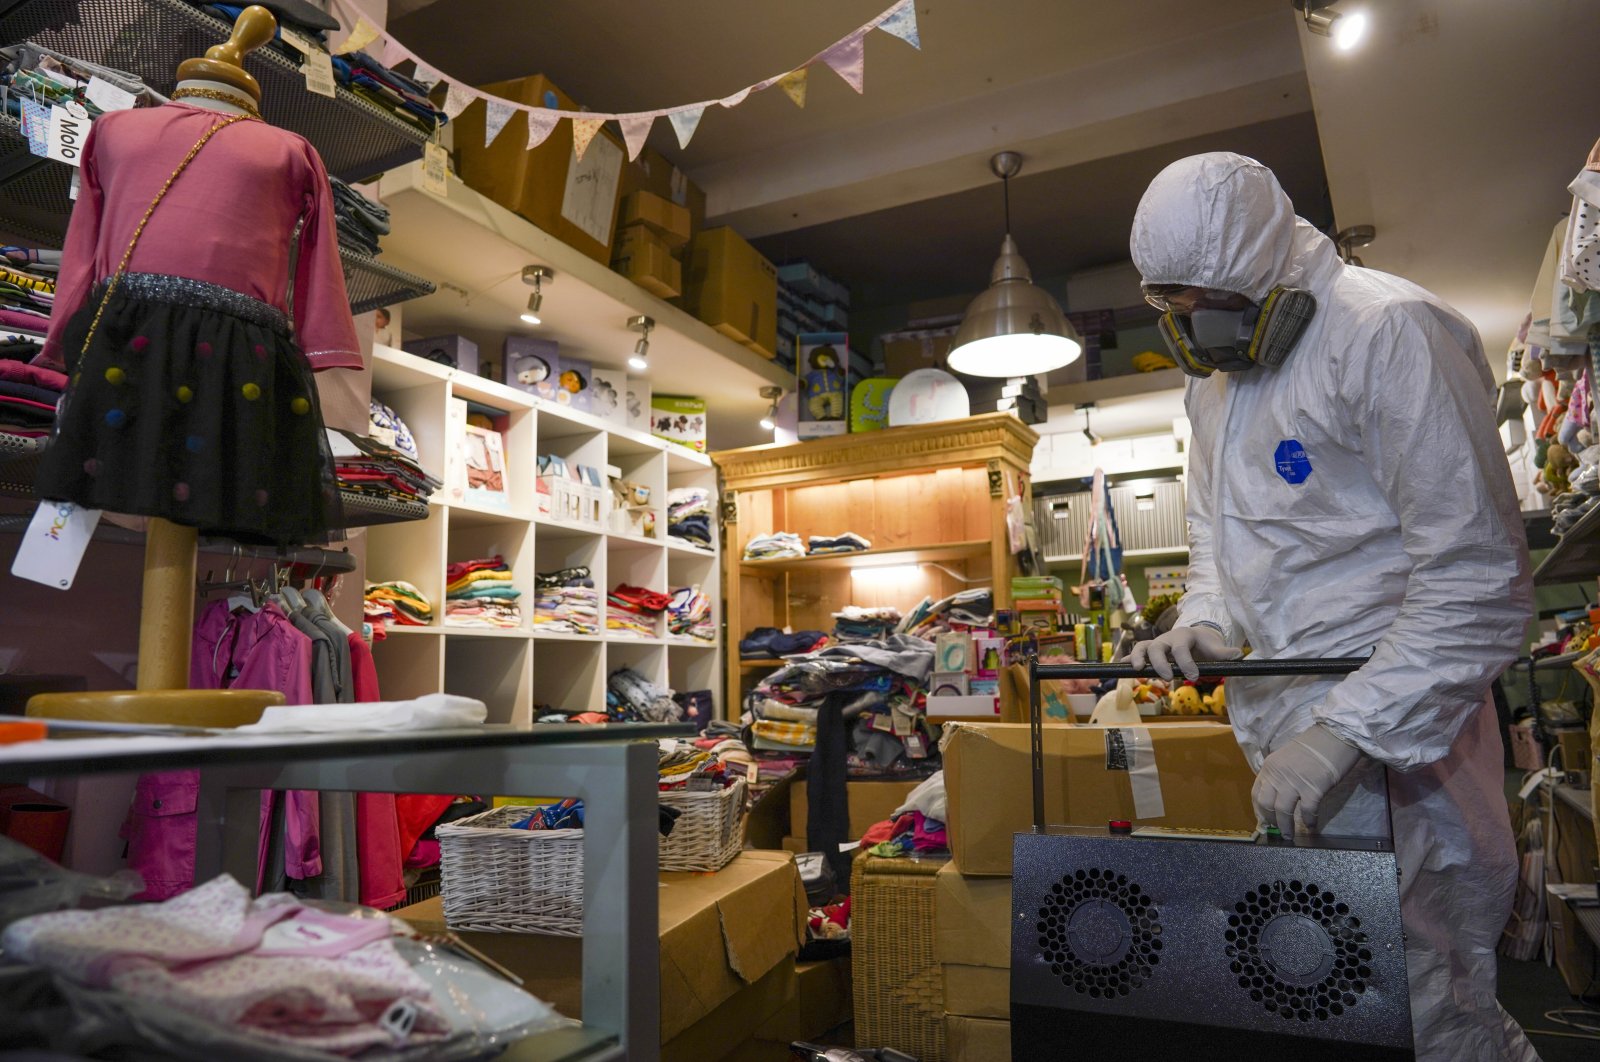 A man in protective gear prepares to sanitize a children's clothes shop before it opens to prevent the spread of COVID-19, in Rome, Italy, April 14, 2020. (AP Photo)